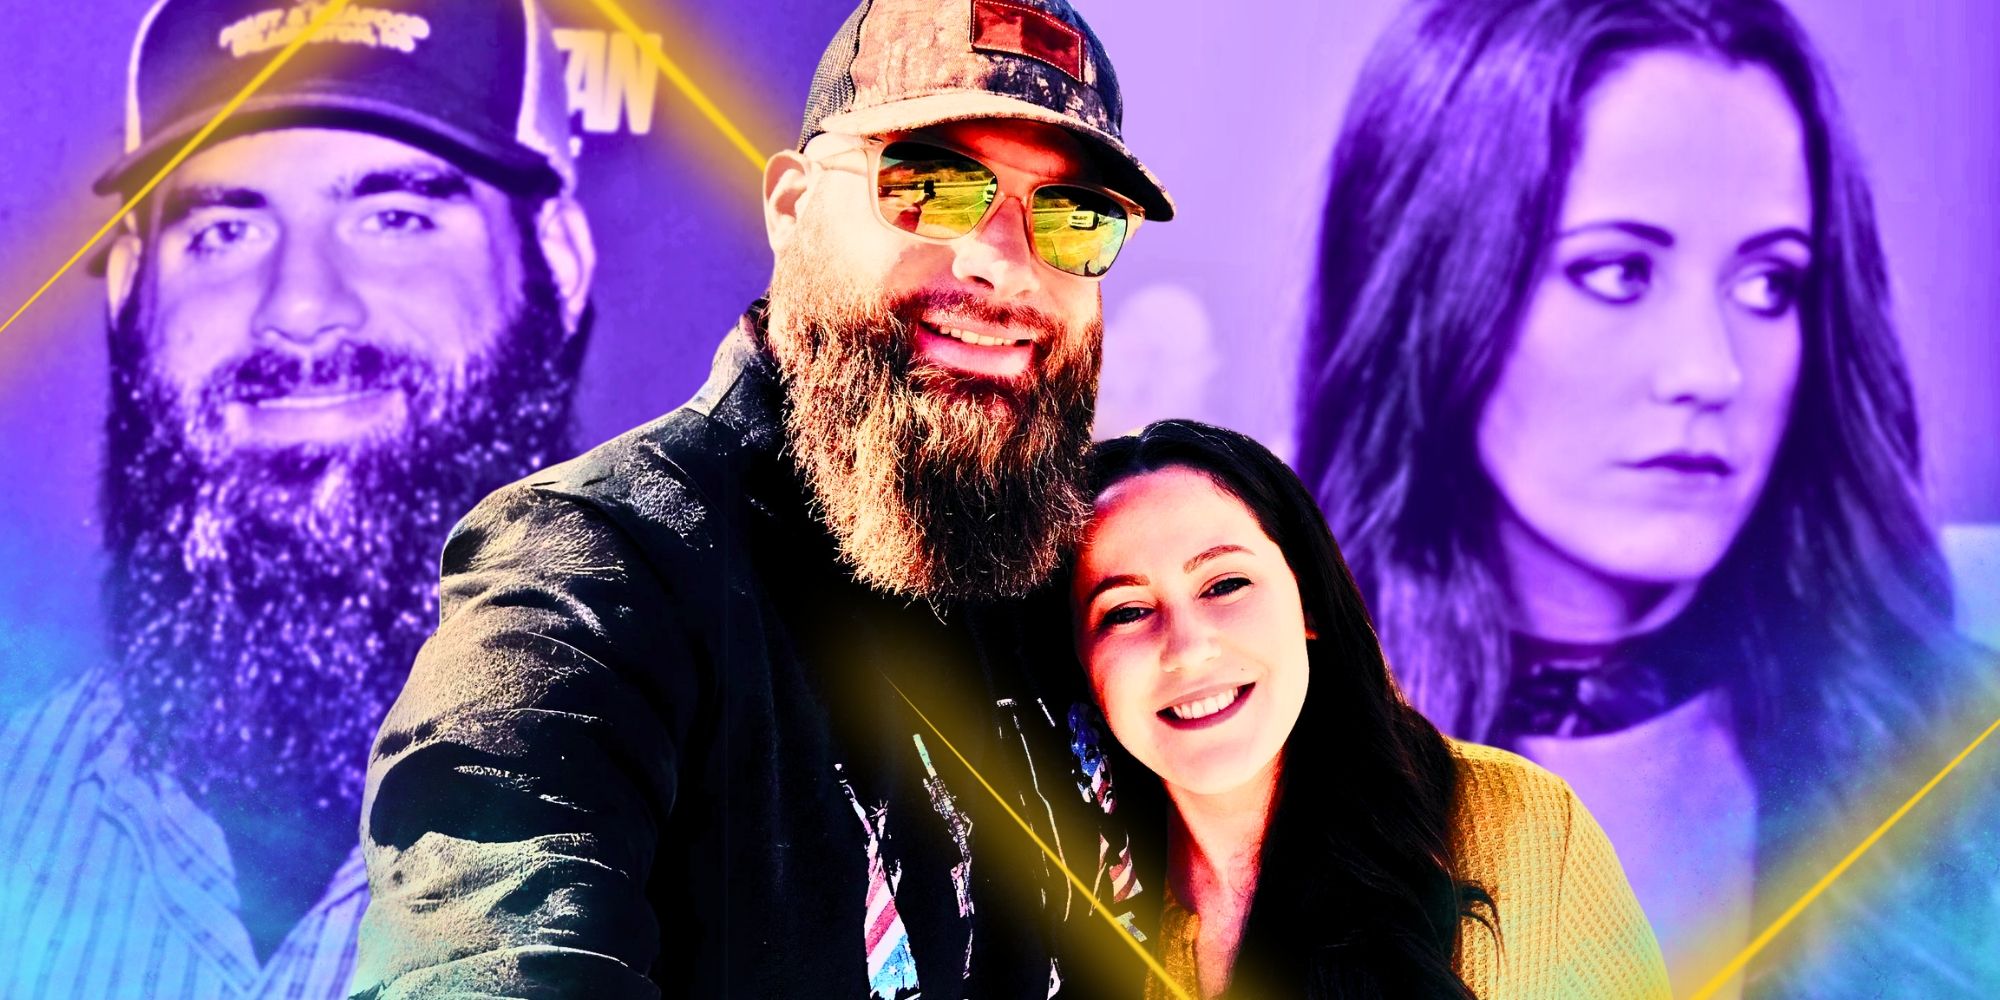 A montage of David Eason and Jenelle Evans from Teen Mom smiling in the foreground and separated in the background.